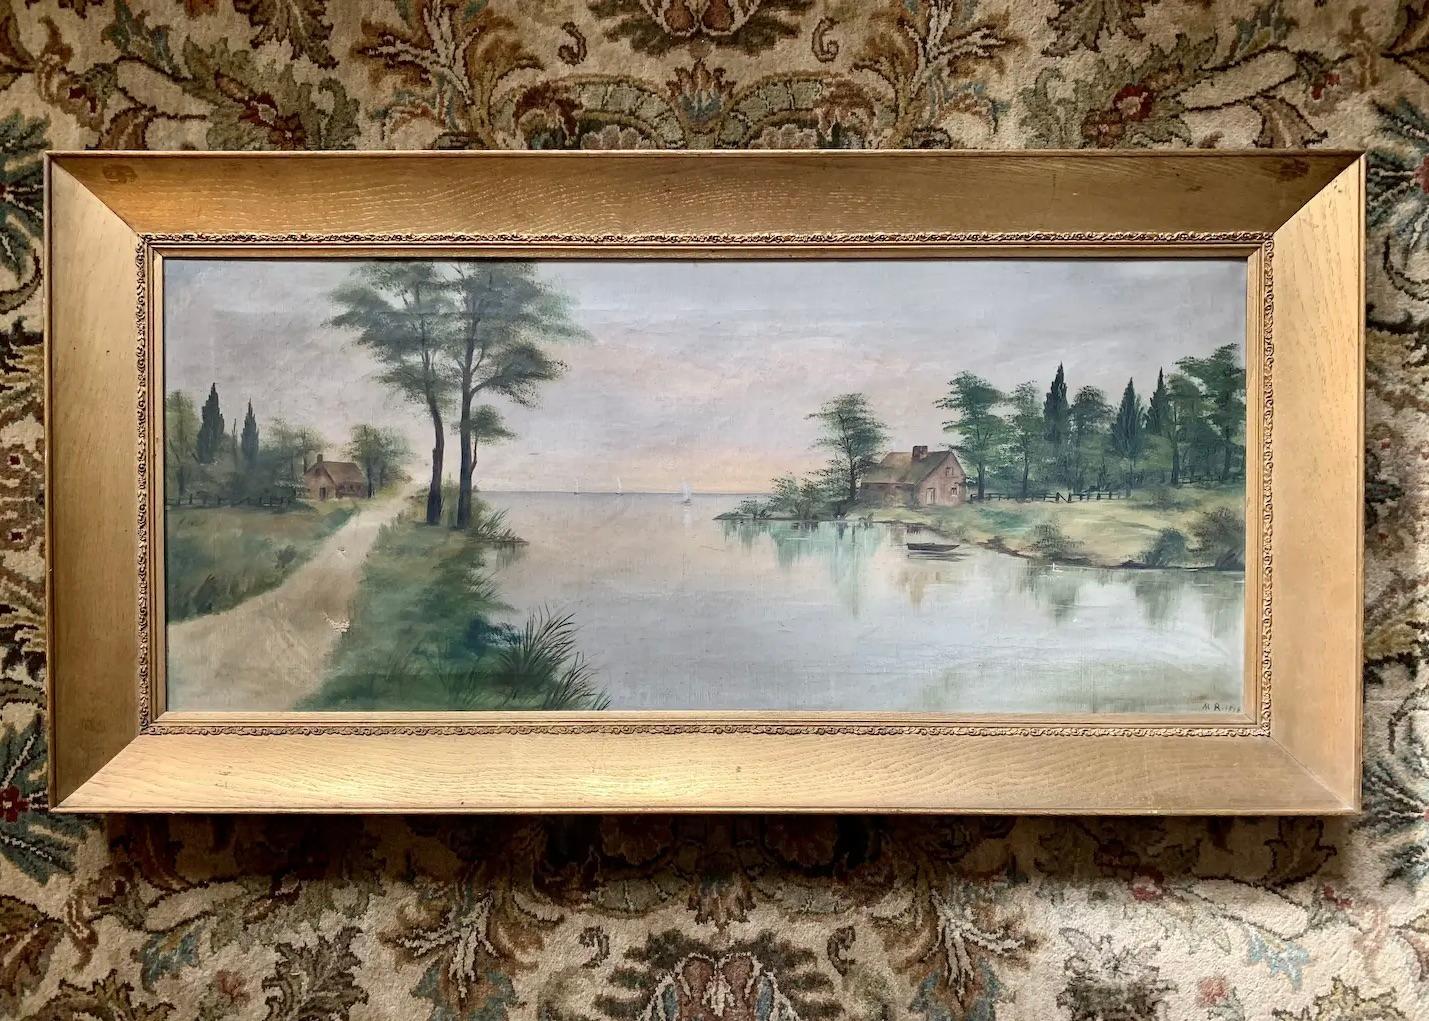 Offering a serene Danish landscape, oil on canvas, circa 1818 signed M.R. Showcased in original sleek and sturdy gilt wooden frame of the period. Soothing cottage retreat on the water in earthy tones compliments various styles from rich to neutral